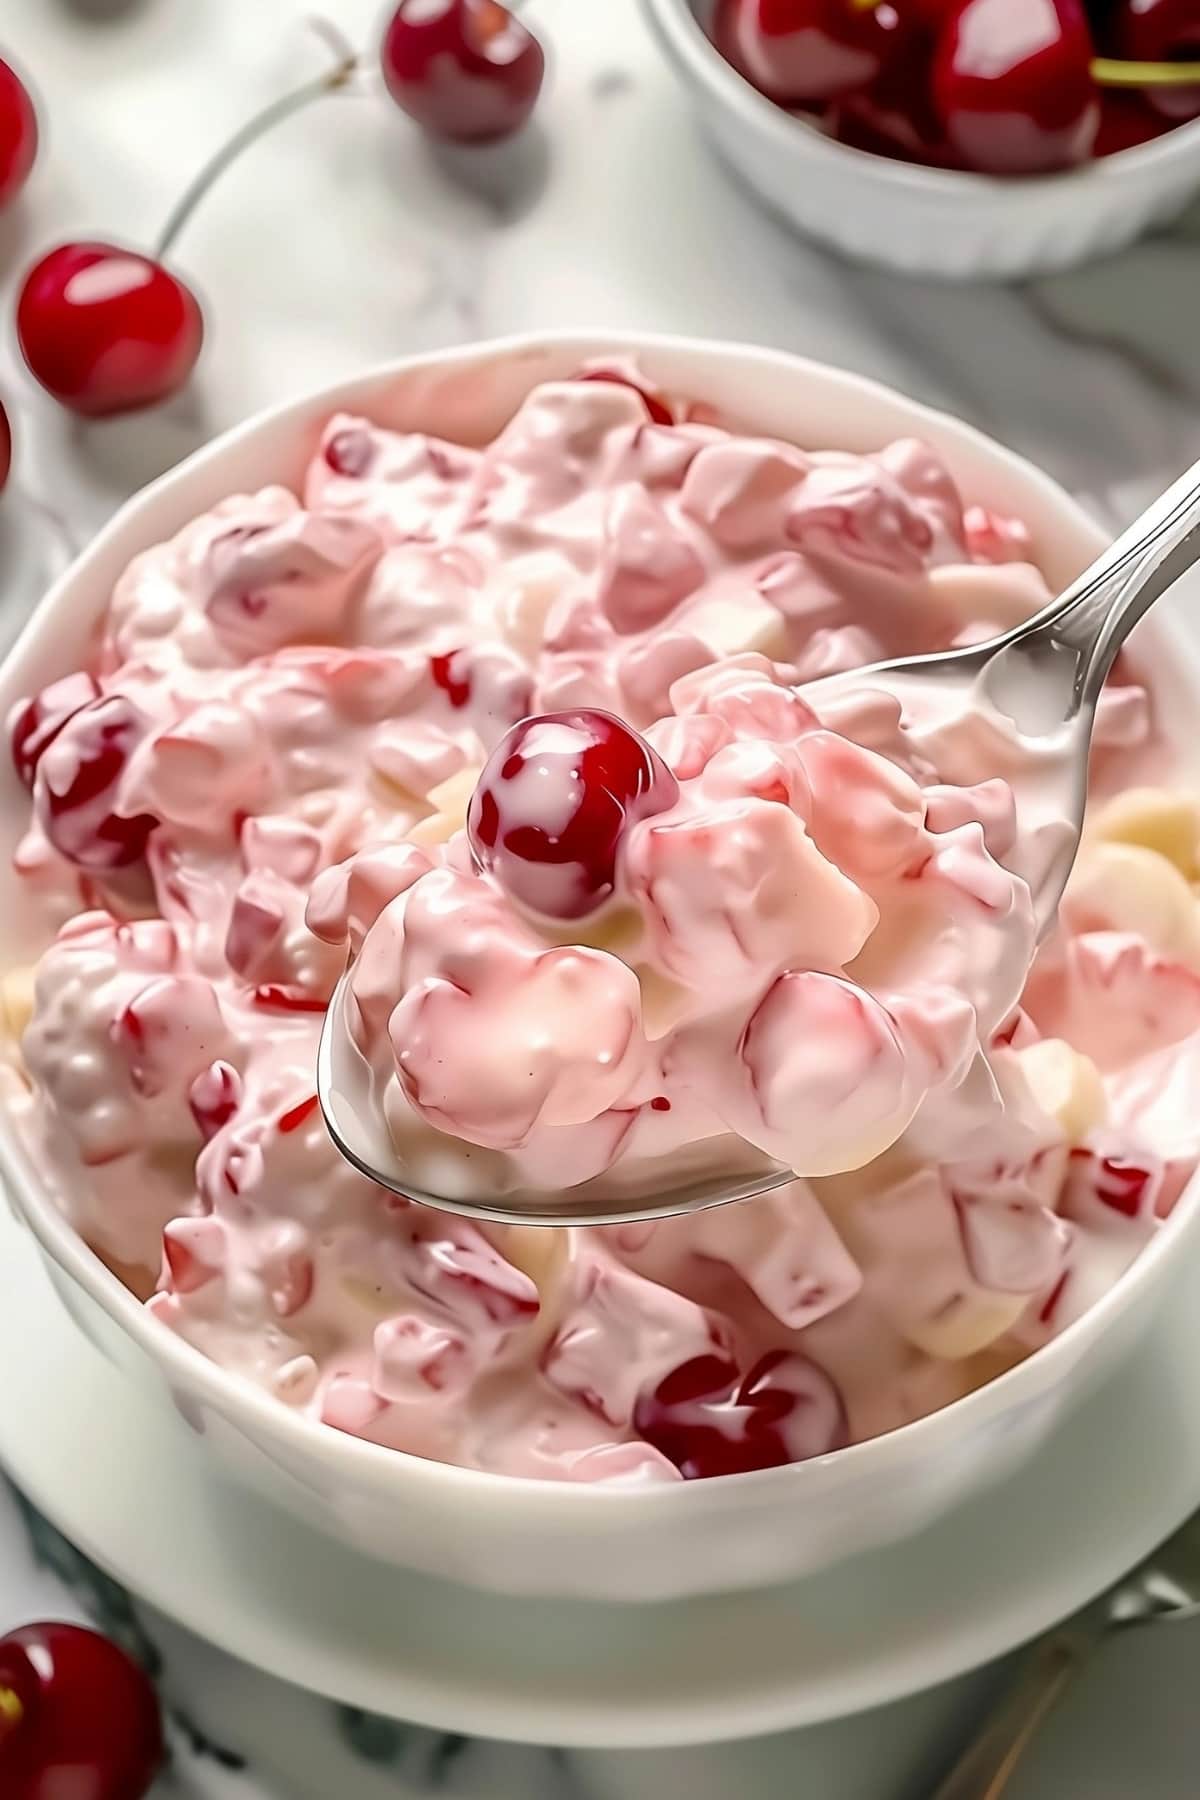 Spoonful of better than sex fruit salad with cherries in a creamy dressing.